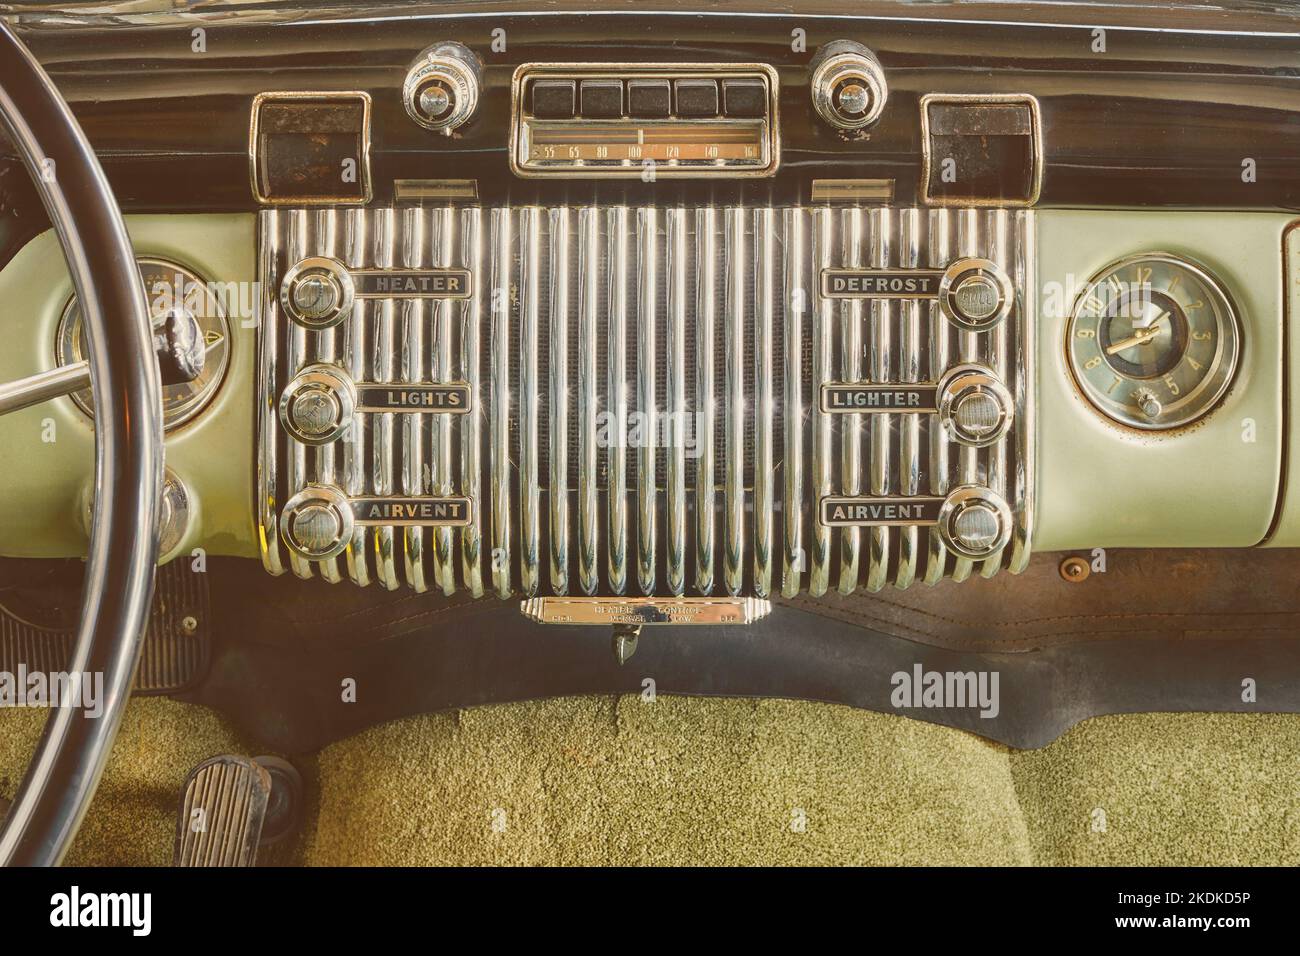 Old car radio inside a classic American car with chrome dashboard Stock Photo